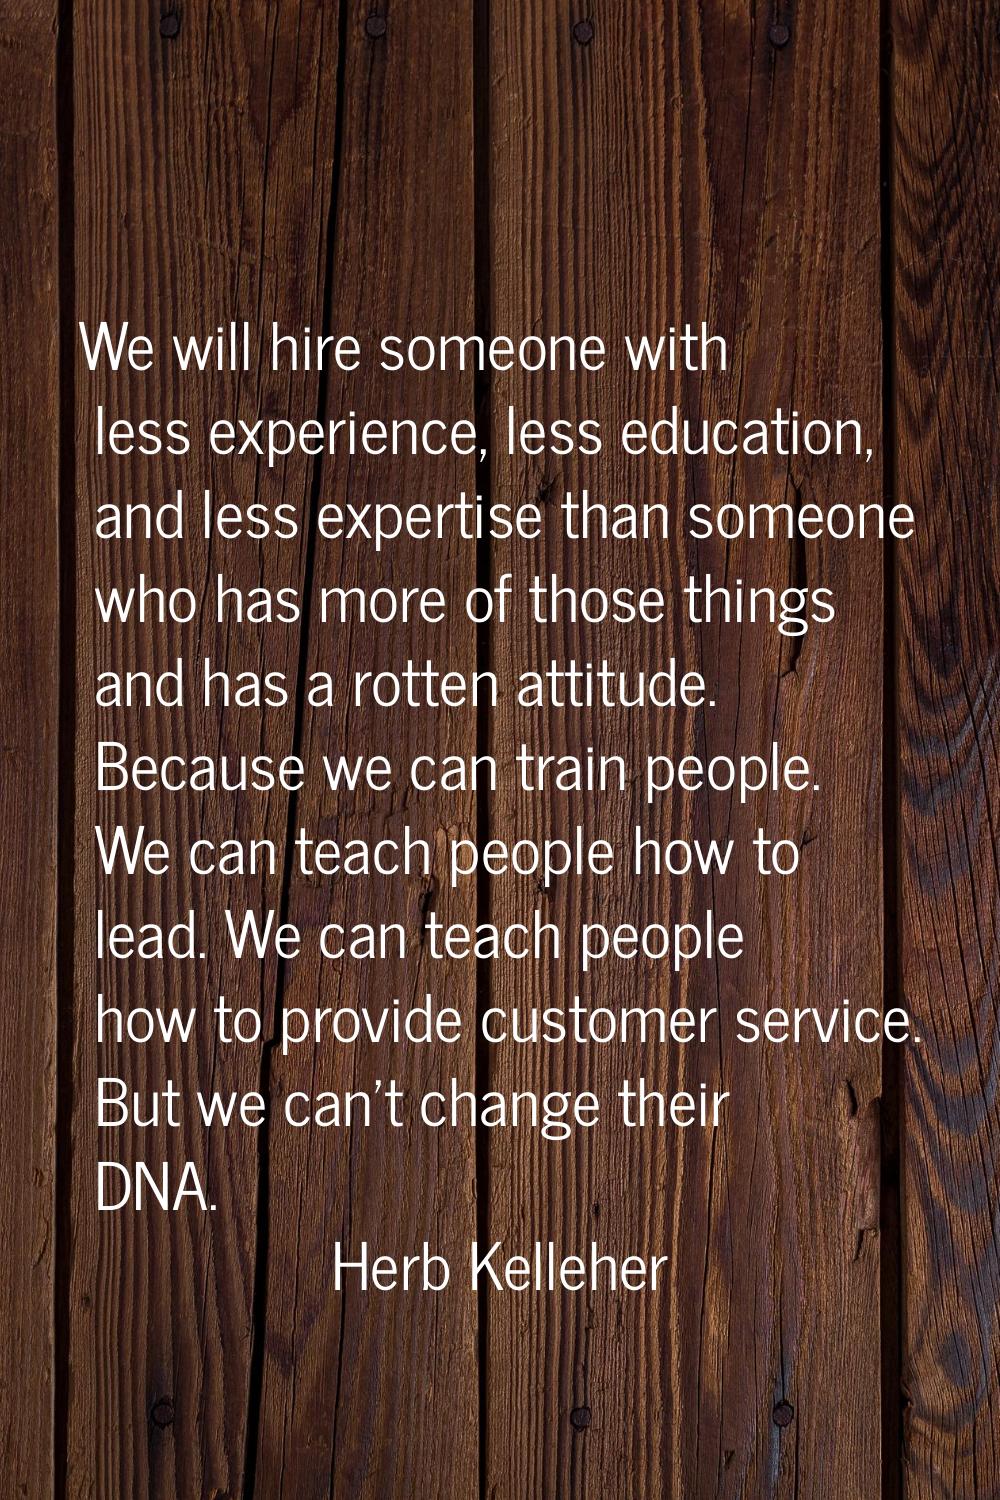 We will hire someone with less experience, less education, and less expertise than someone who has 